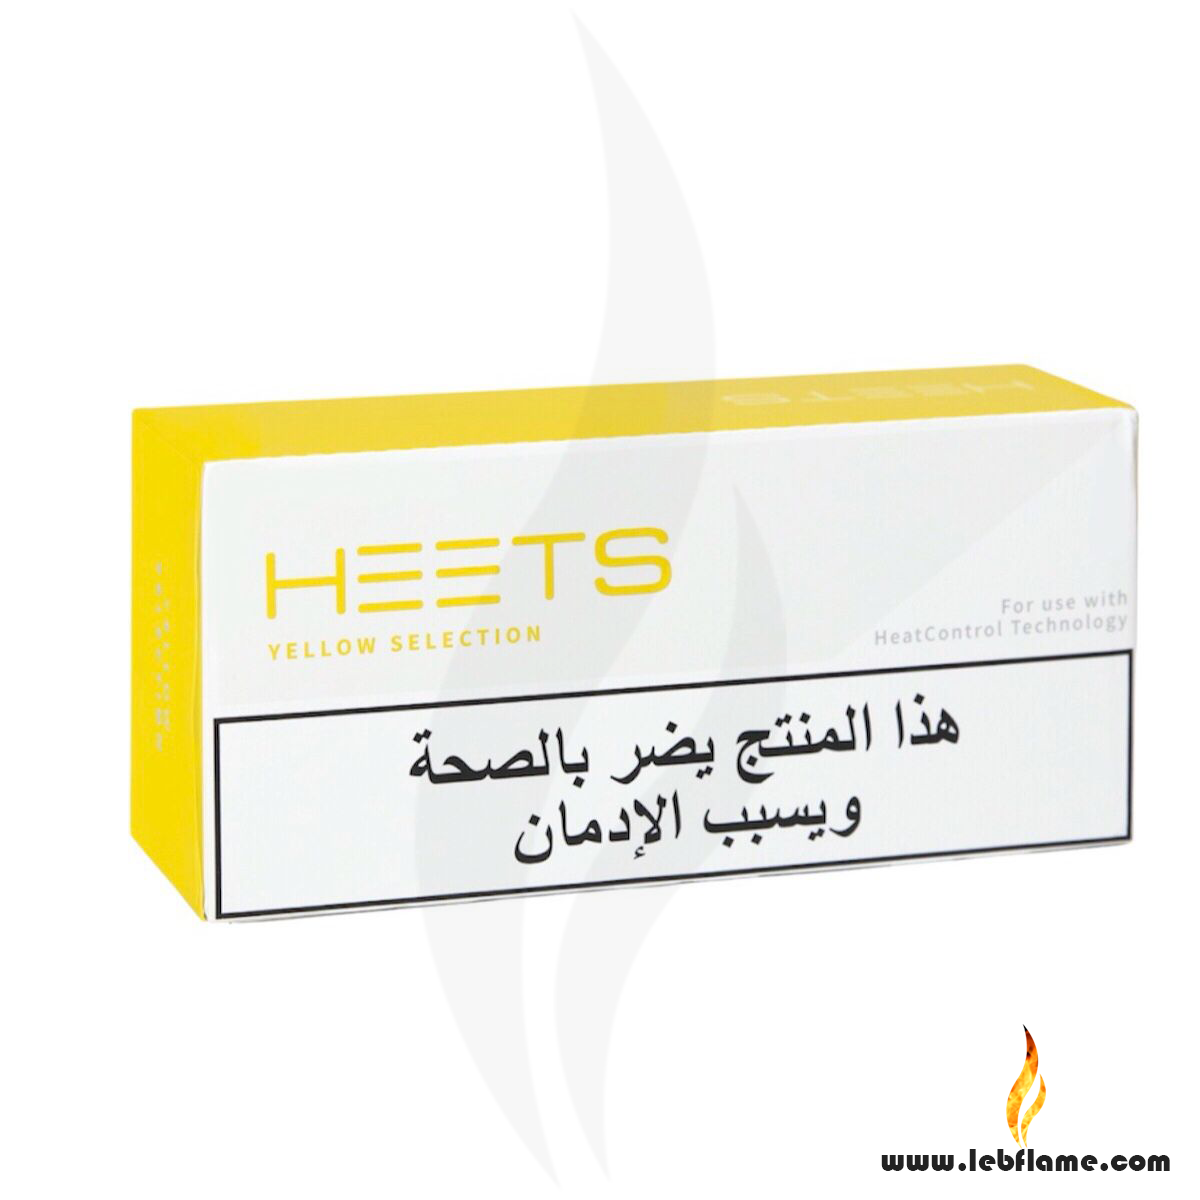 HEETS Yellow Selection Tobacco Sticks, Heets, Heat not burn